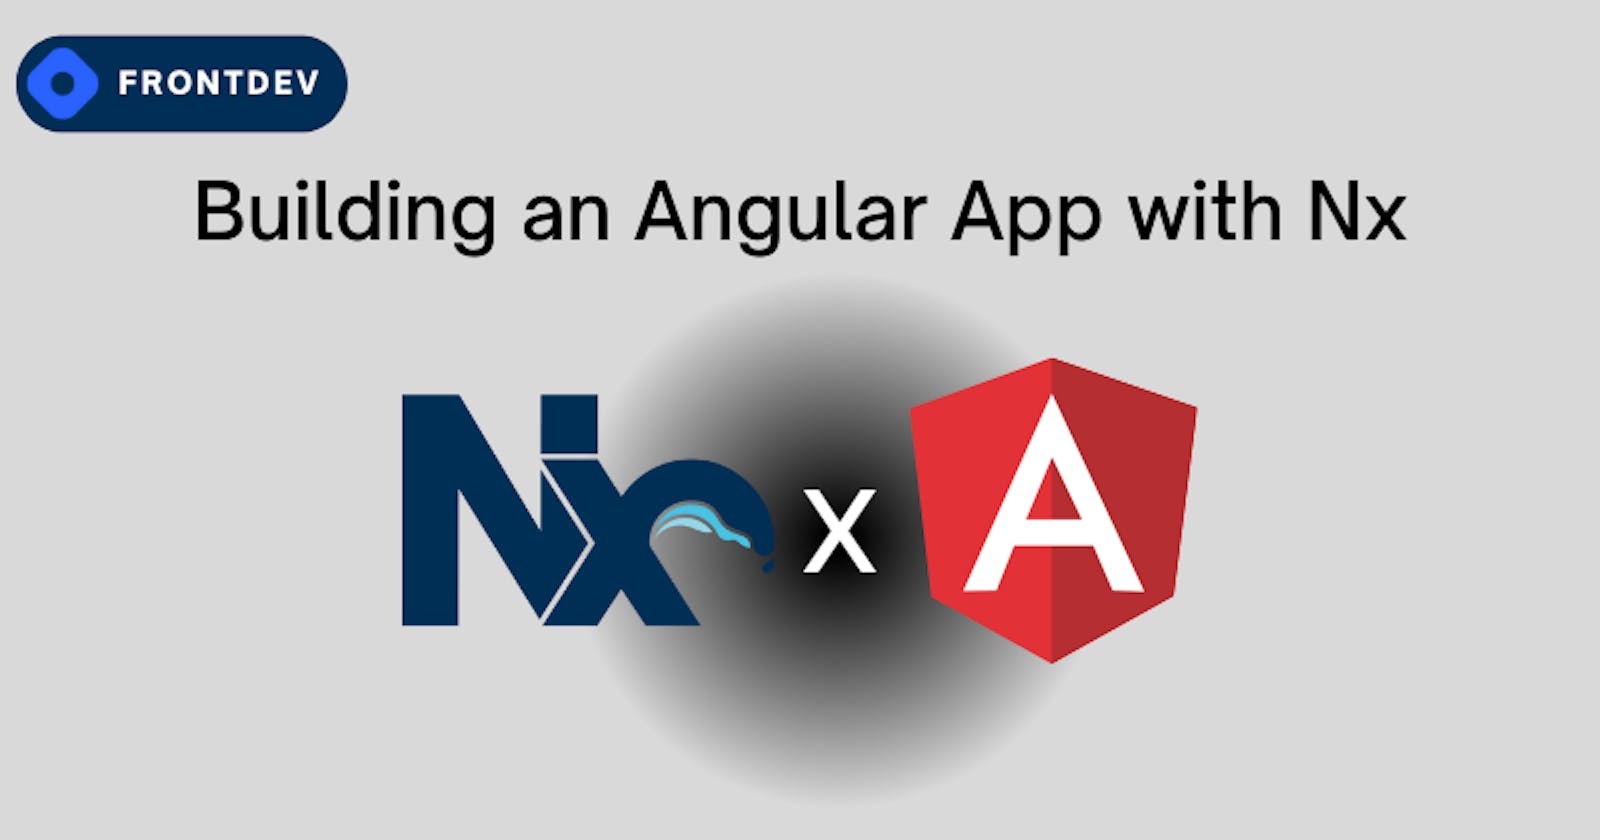 Building an Angular Application with the Nx Workspace